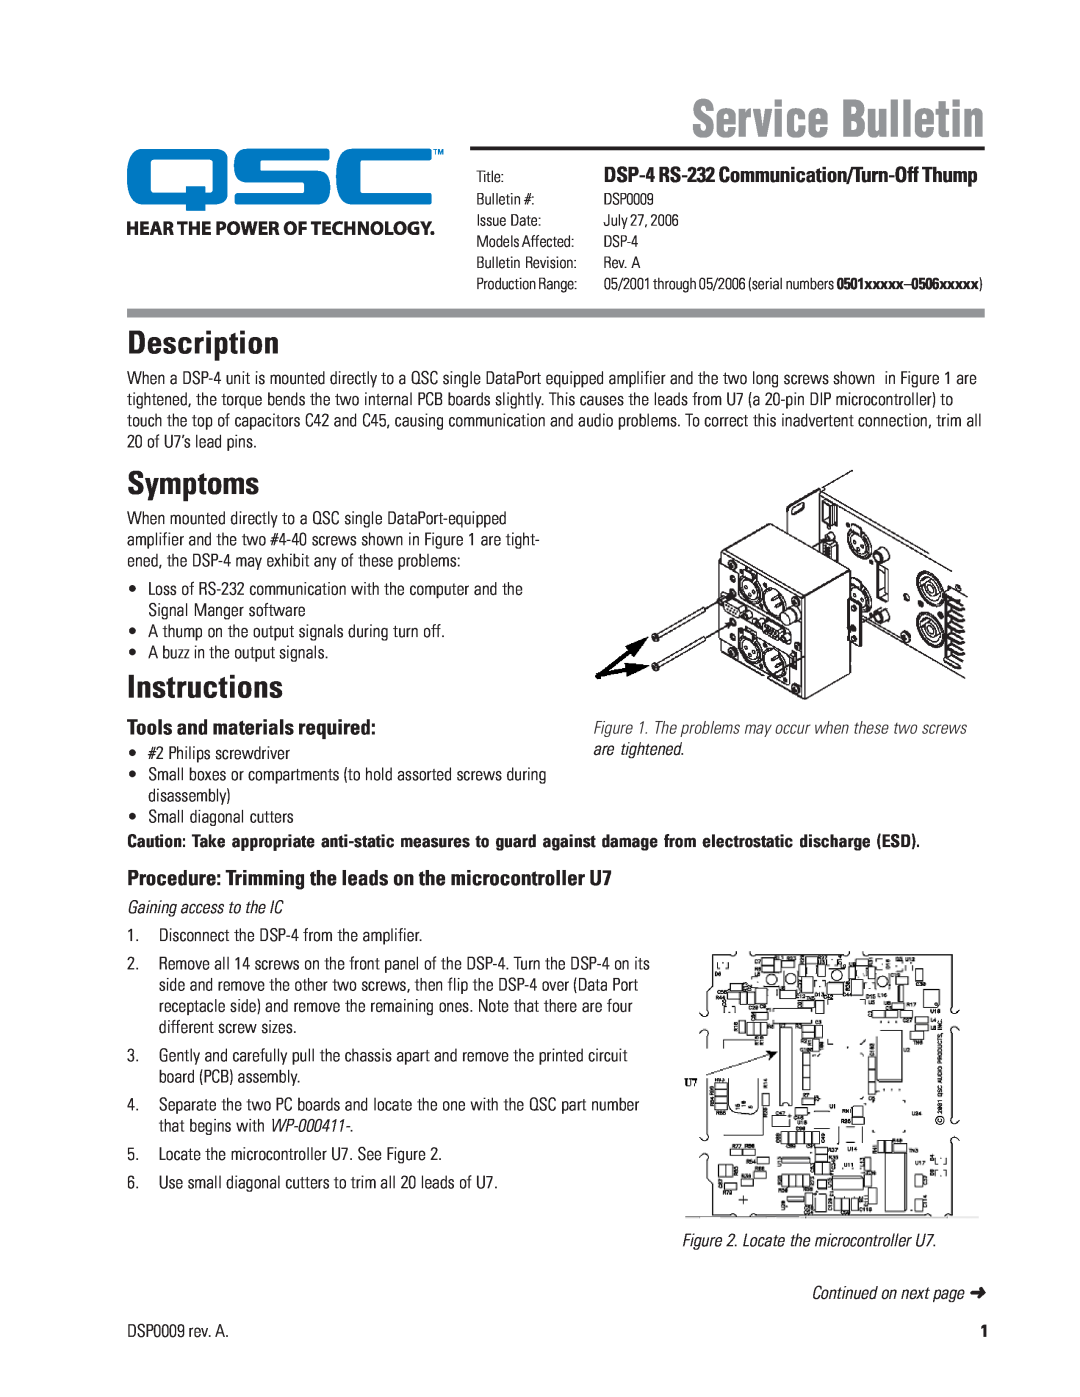 QSC Audio DSP-4 RS-232 manual Description, Symptoms, Instructions, Tools and materials required, Gaining access to the IC 